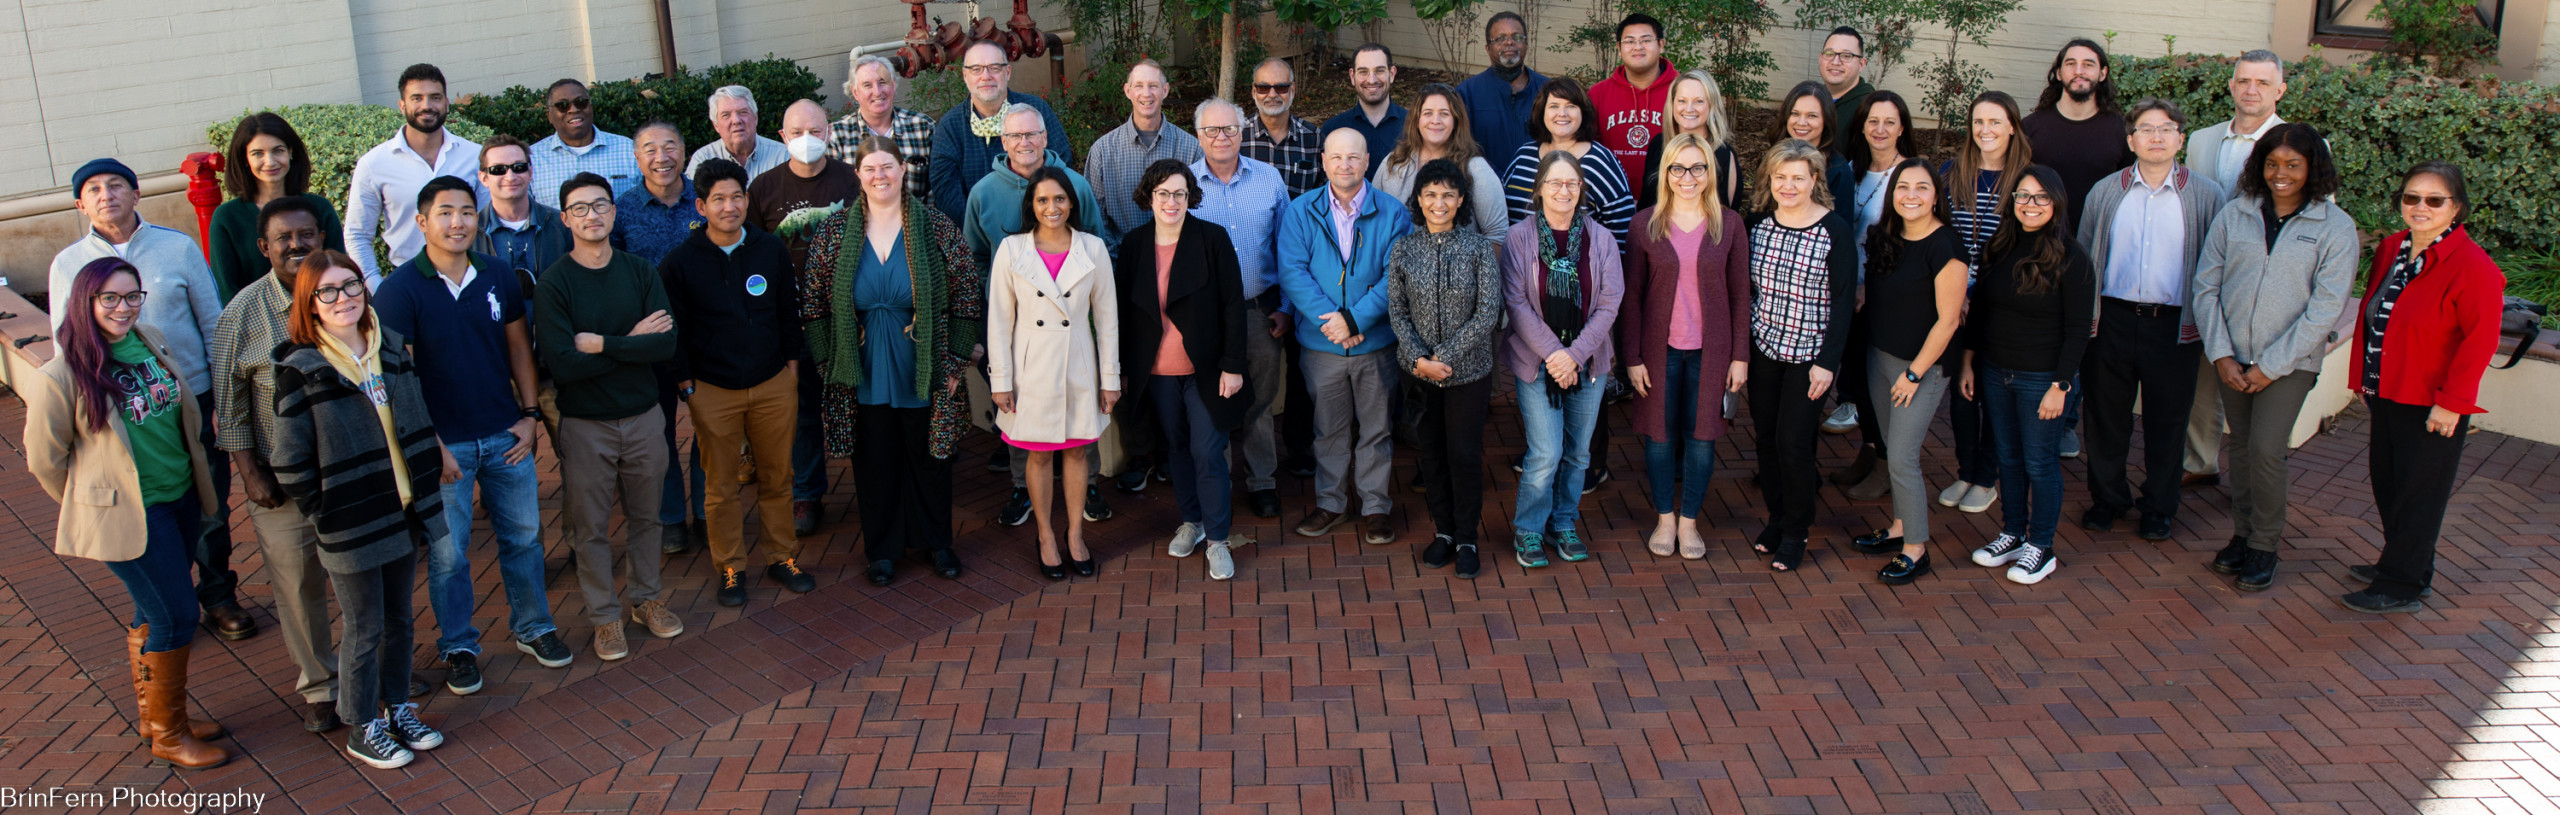 Division of Natural Sciences staff and faculty. Group shot outside 400 building at FC.